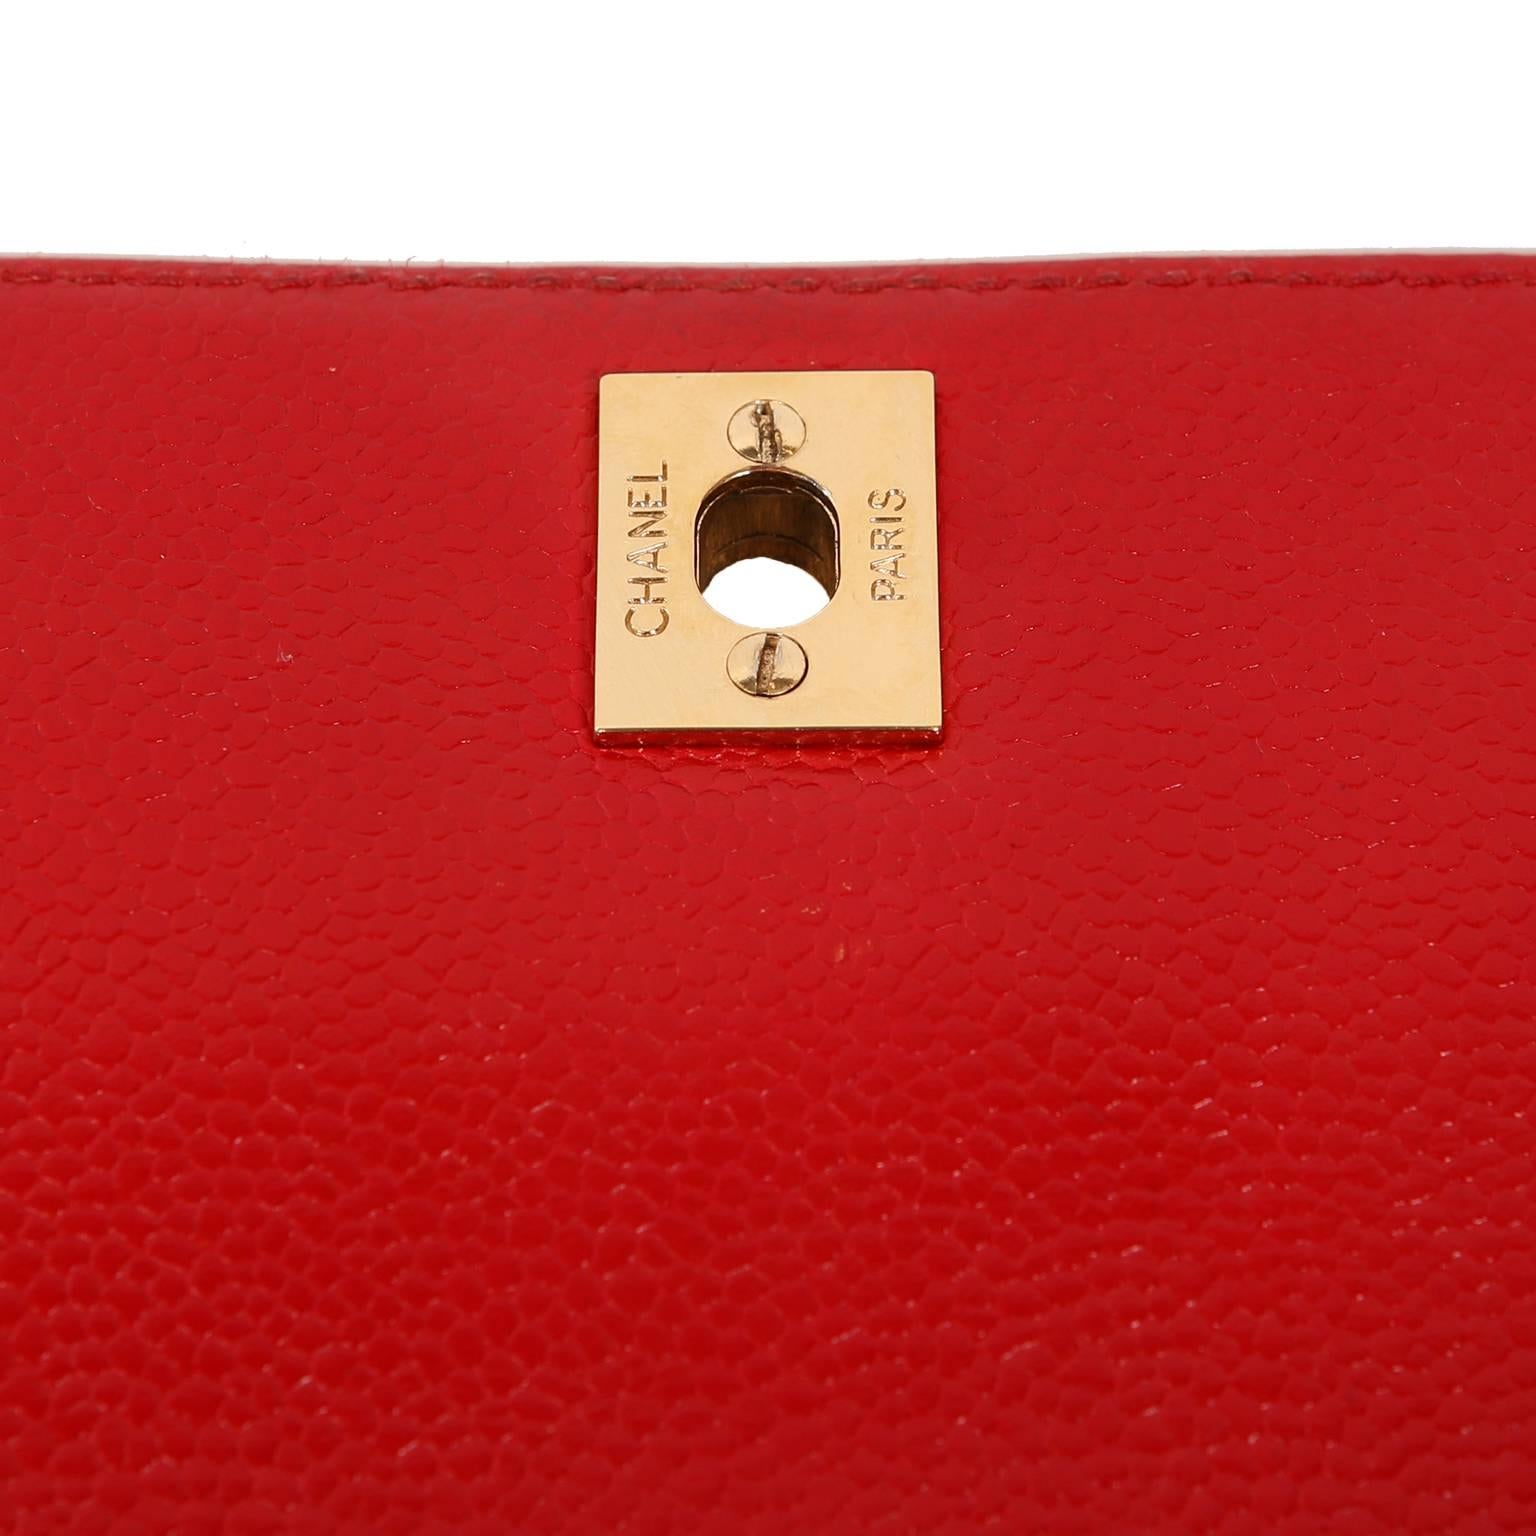 Chanel Red Caviar Leather Kelly Bag 5